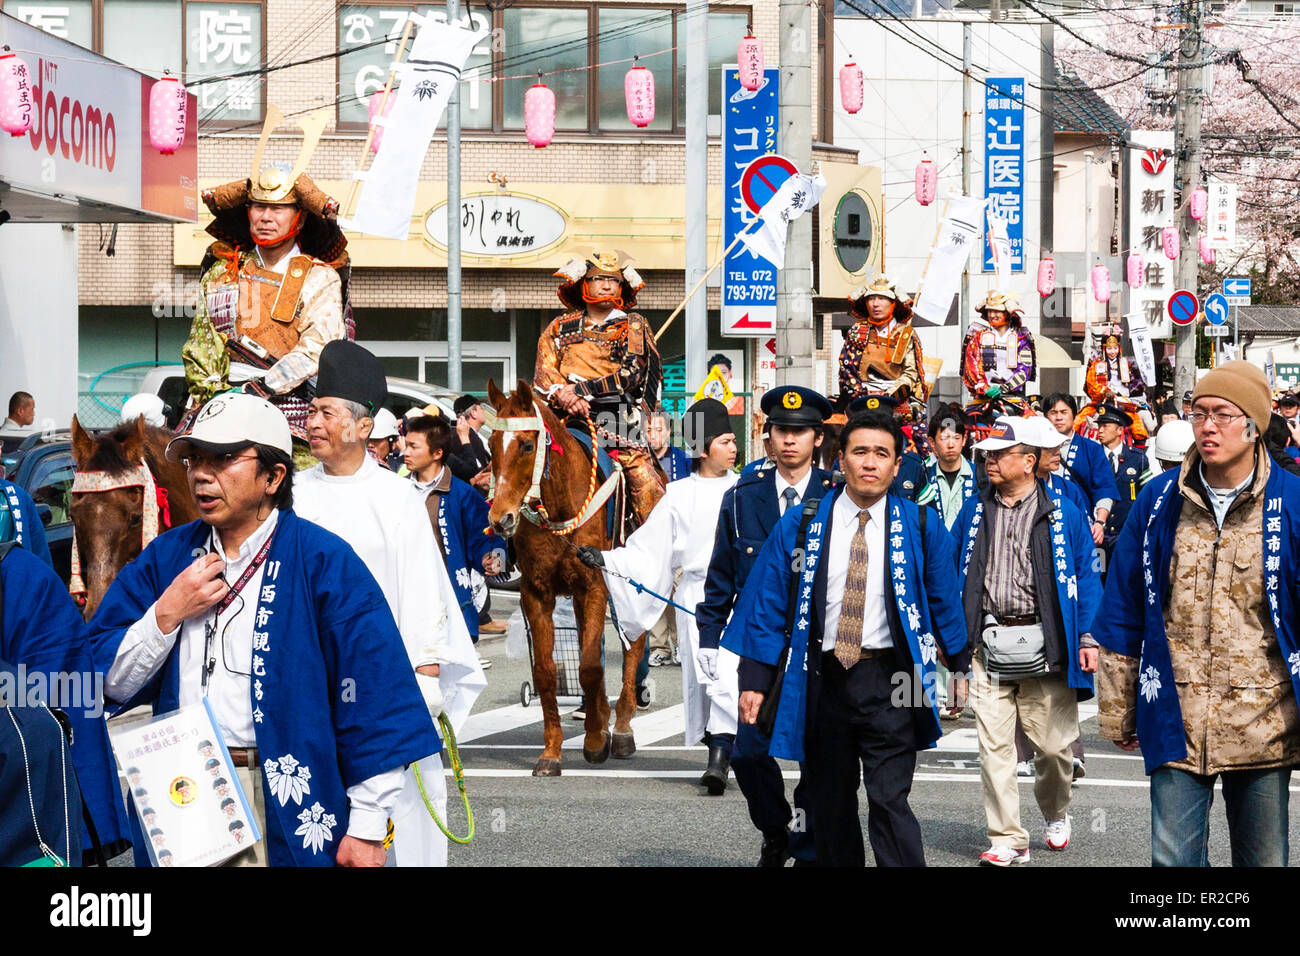 The springtime annual Genji parade in Tada, Japan. Stewards marching with Heian courtiers and mounted samurai warriors through city street. Stock Photo